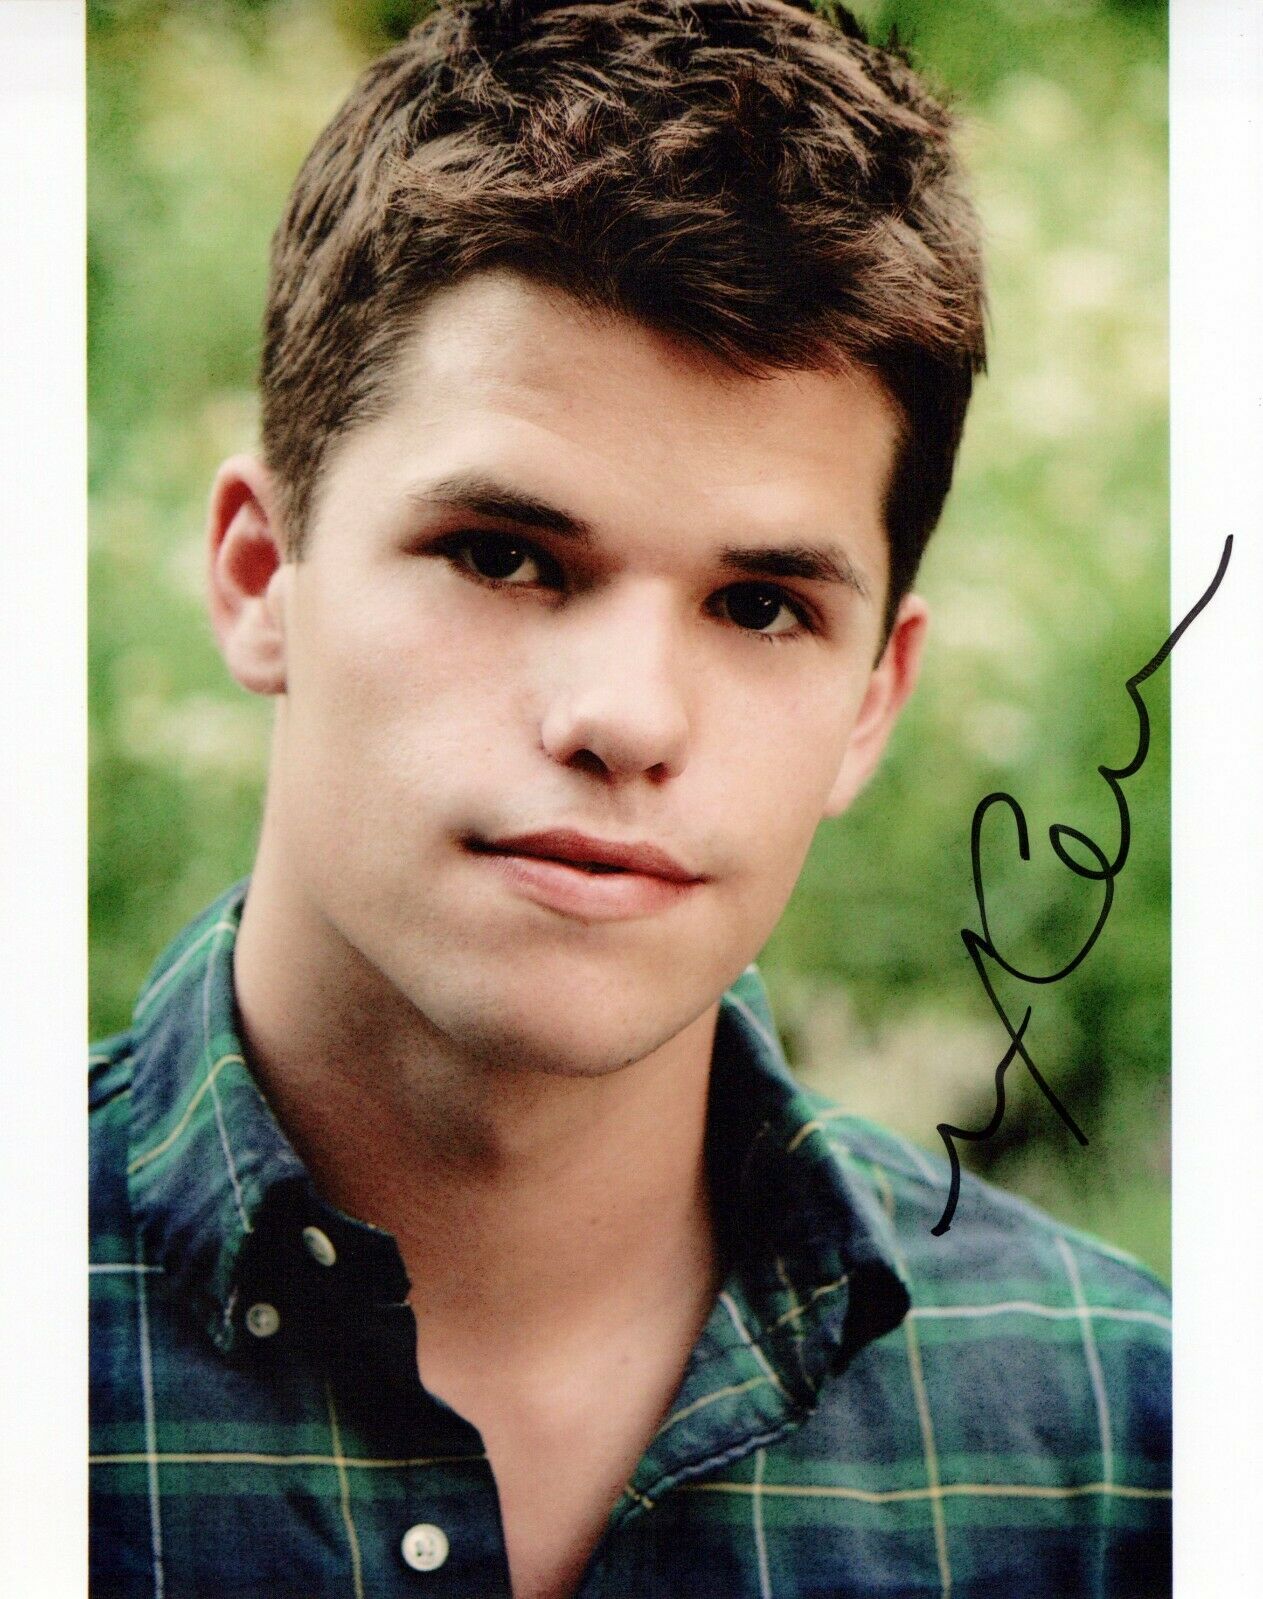 Max Carver head shot autographed photo signed 8x10 #6